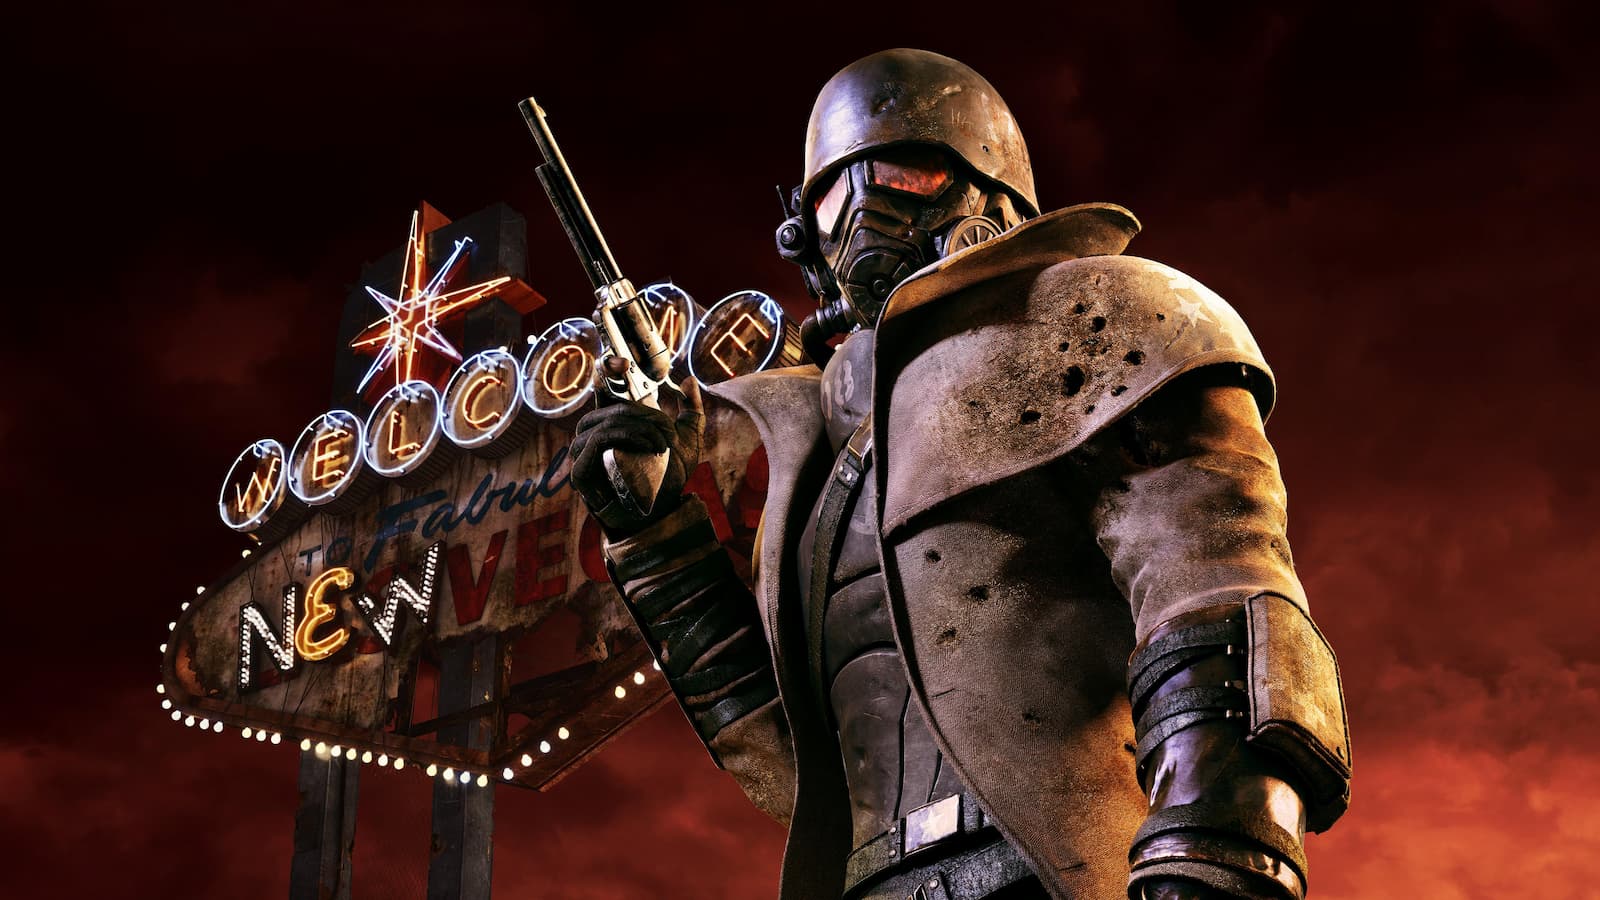 New Fallout fans are playing the wrong games